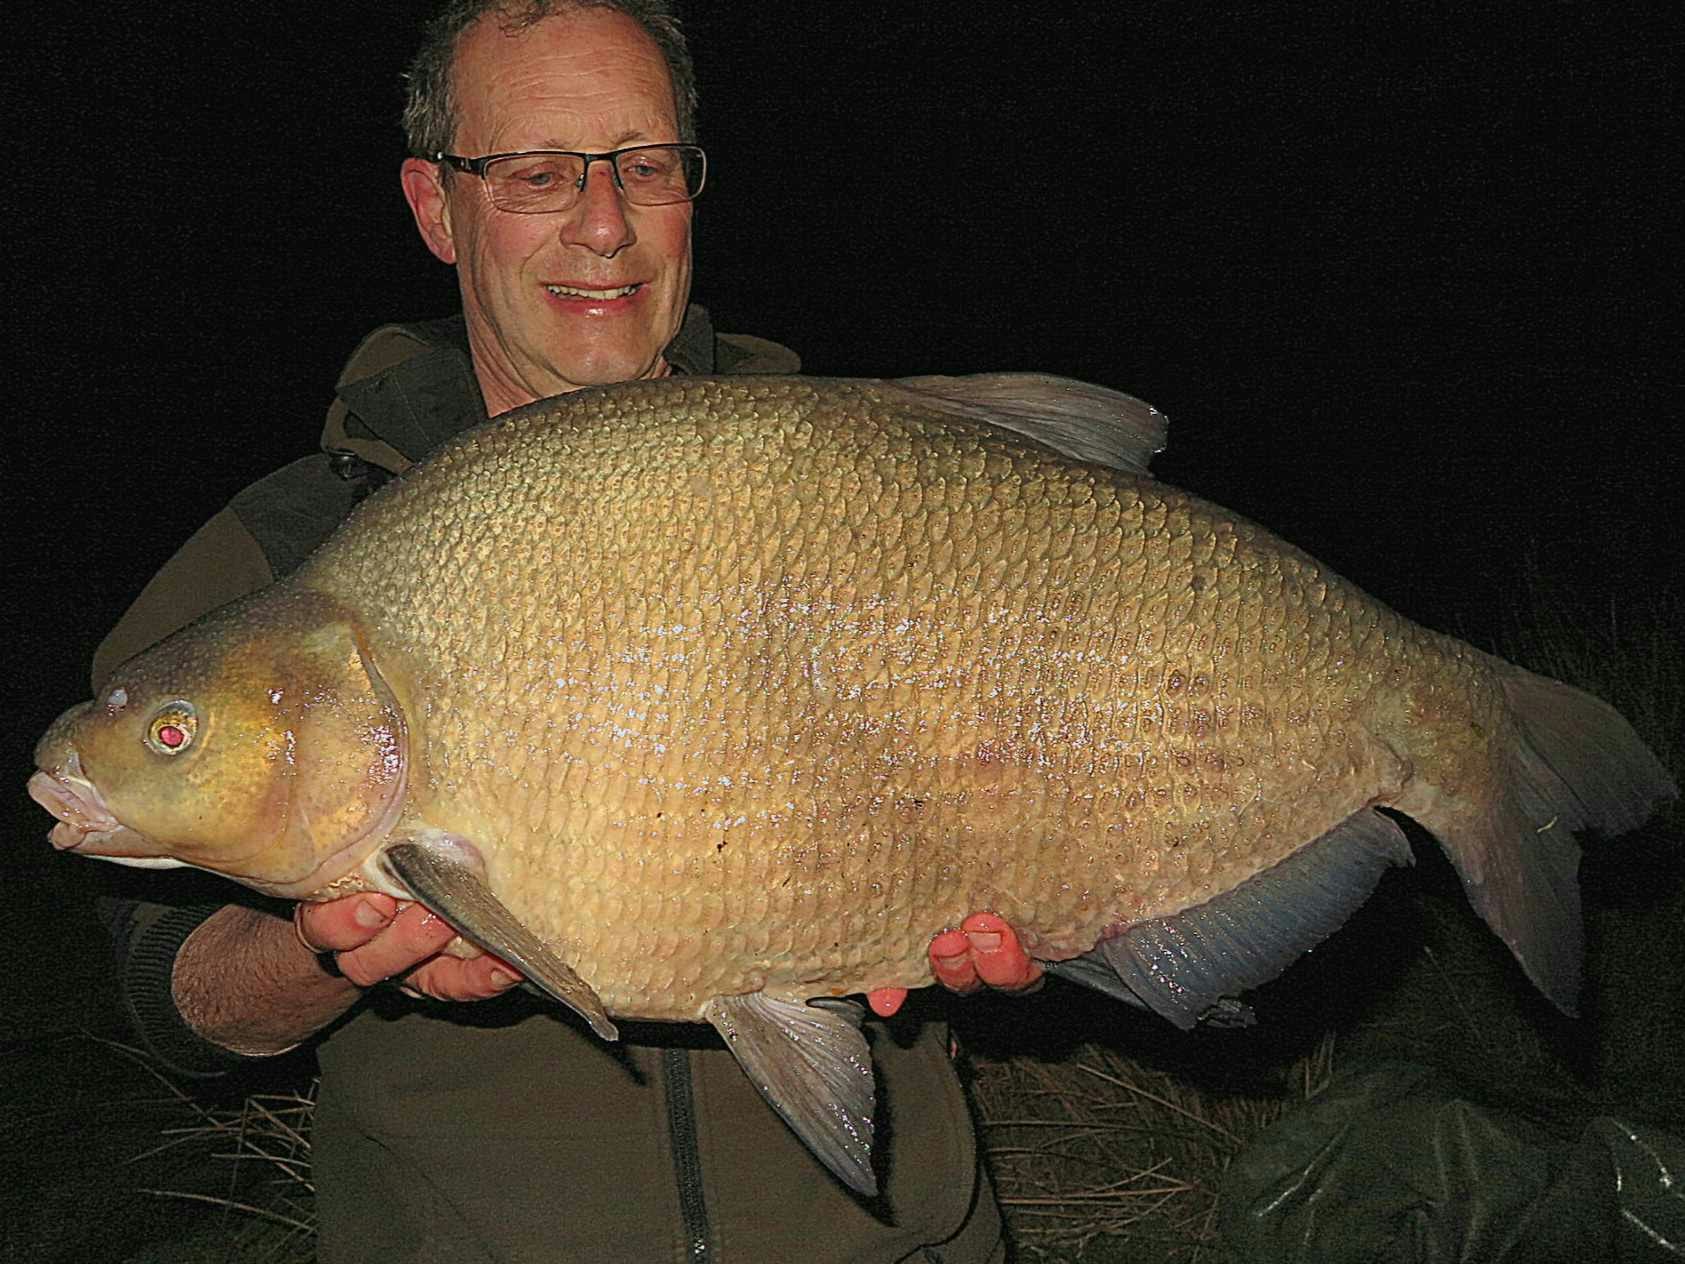 The 17lb 7oz bream in all its glory.